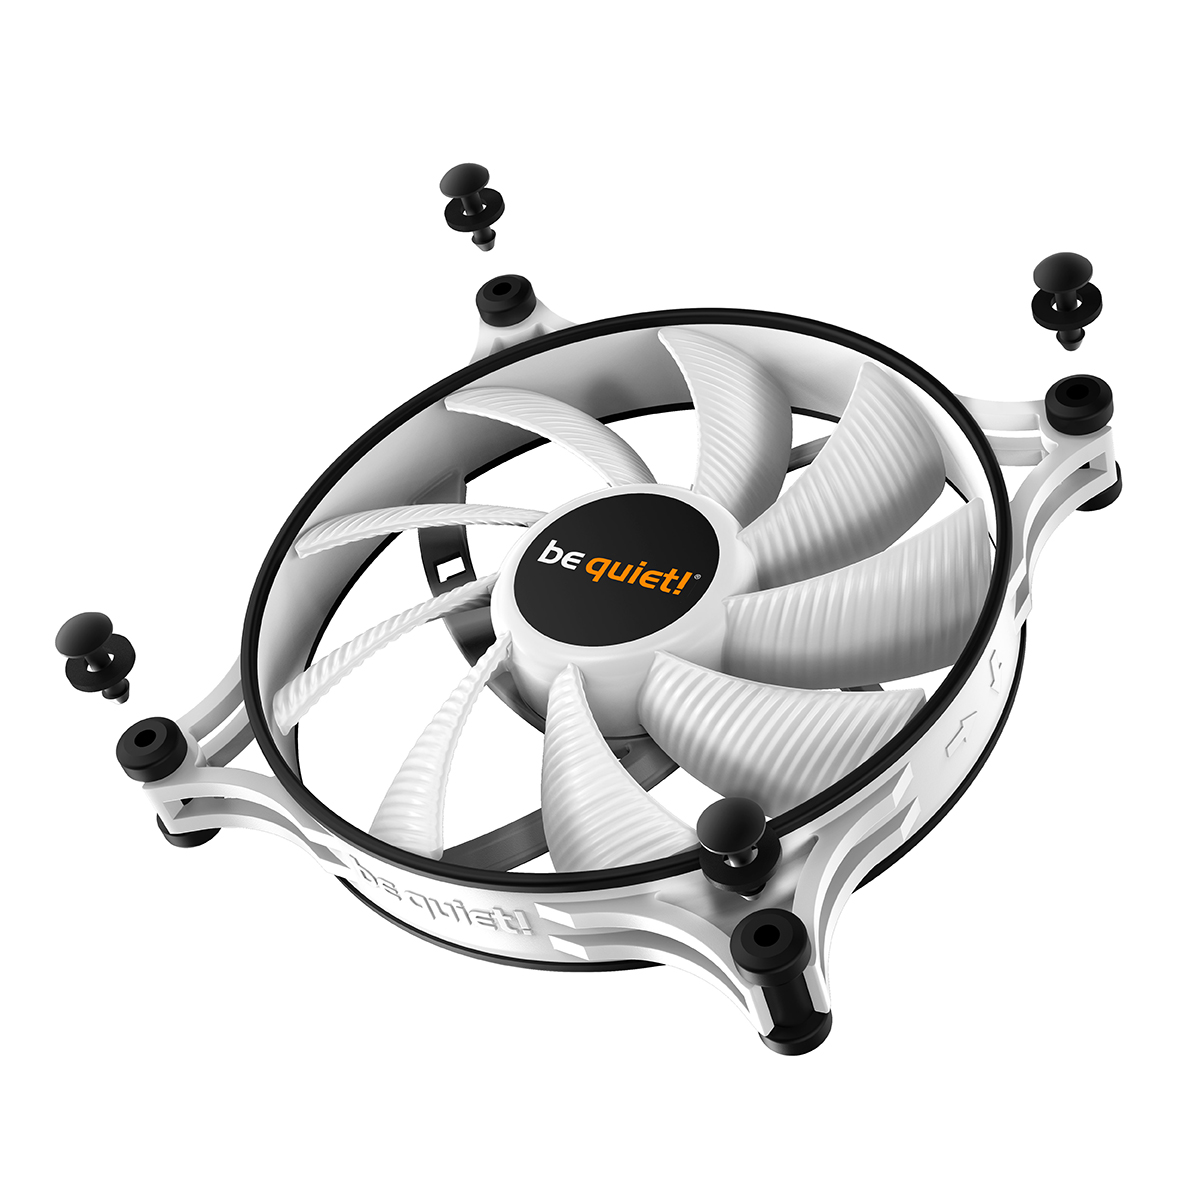 be quiet! - be quiet! Shadow Wings 2 140mm PWM Fan - White